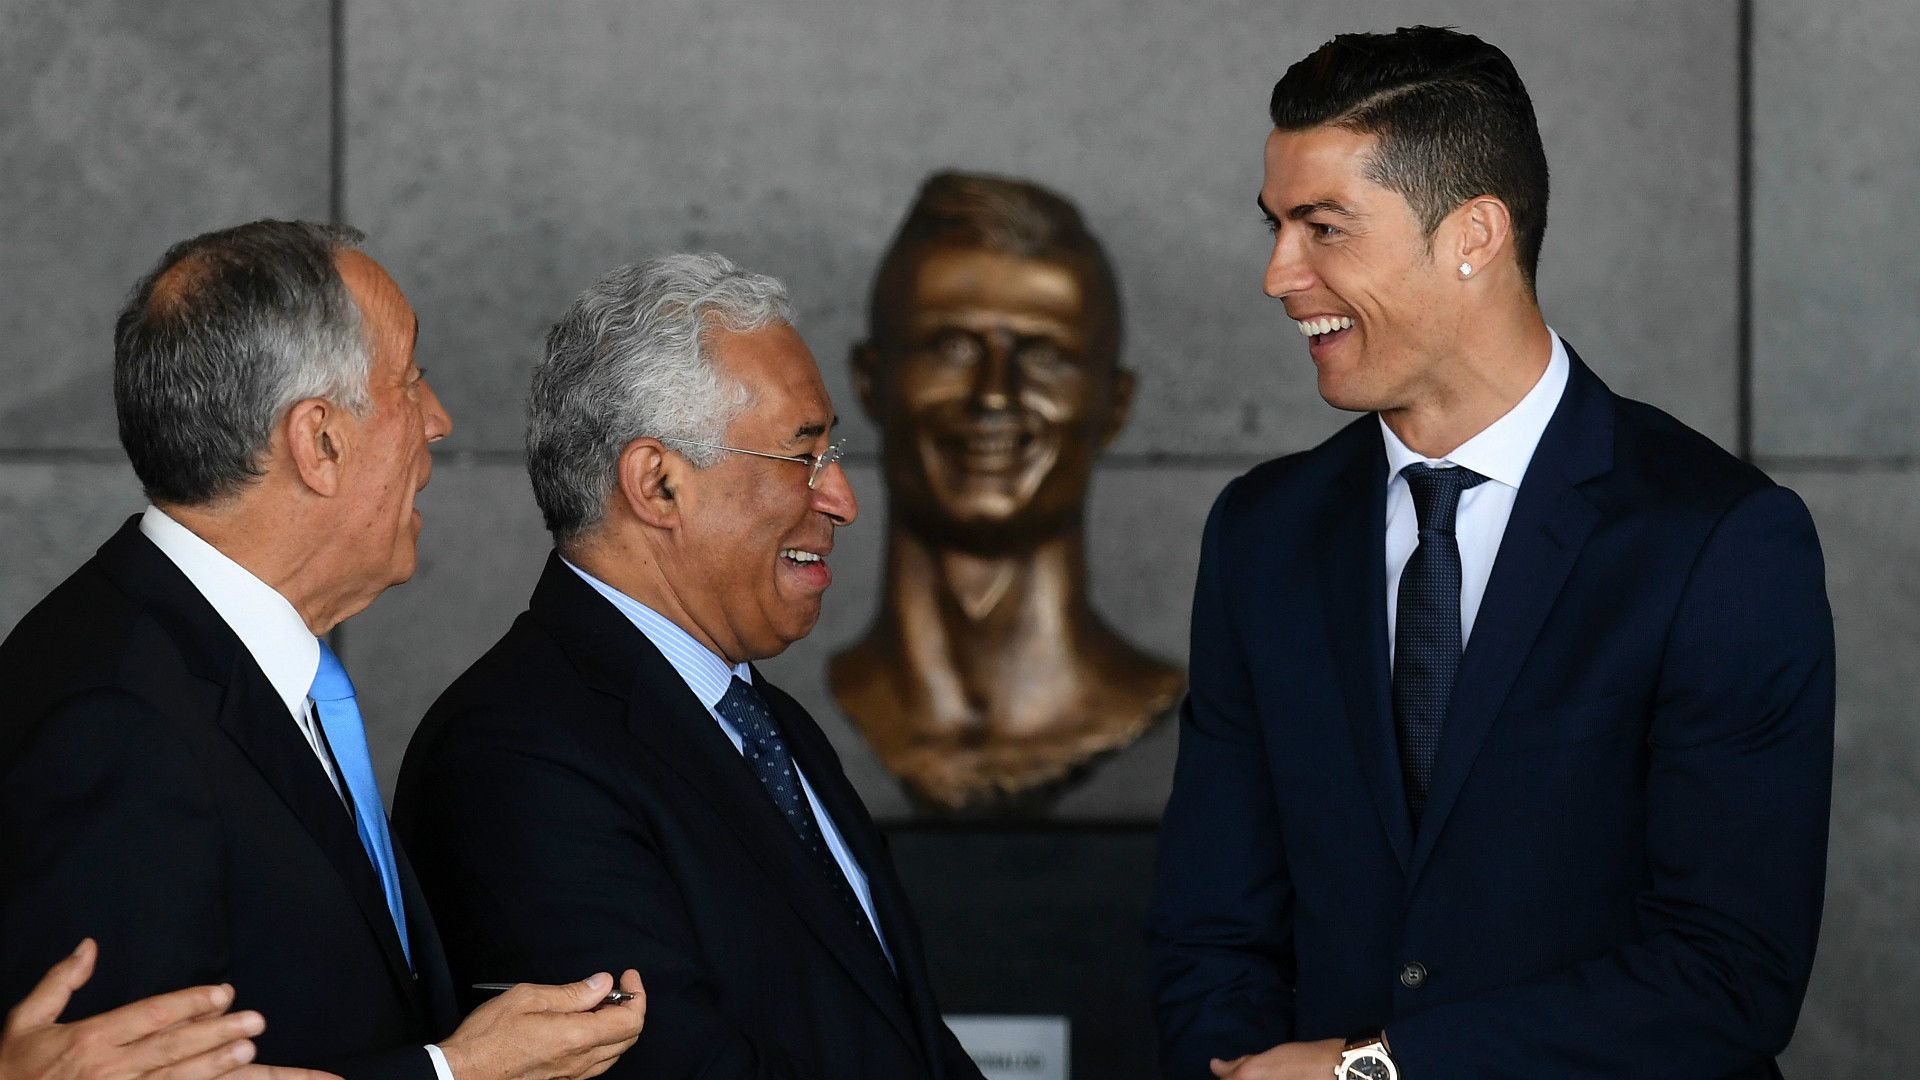 Cristiano Ronaldo statue: Who sculpted it, where is it & all you need